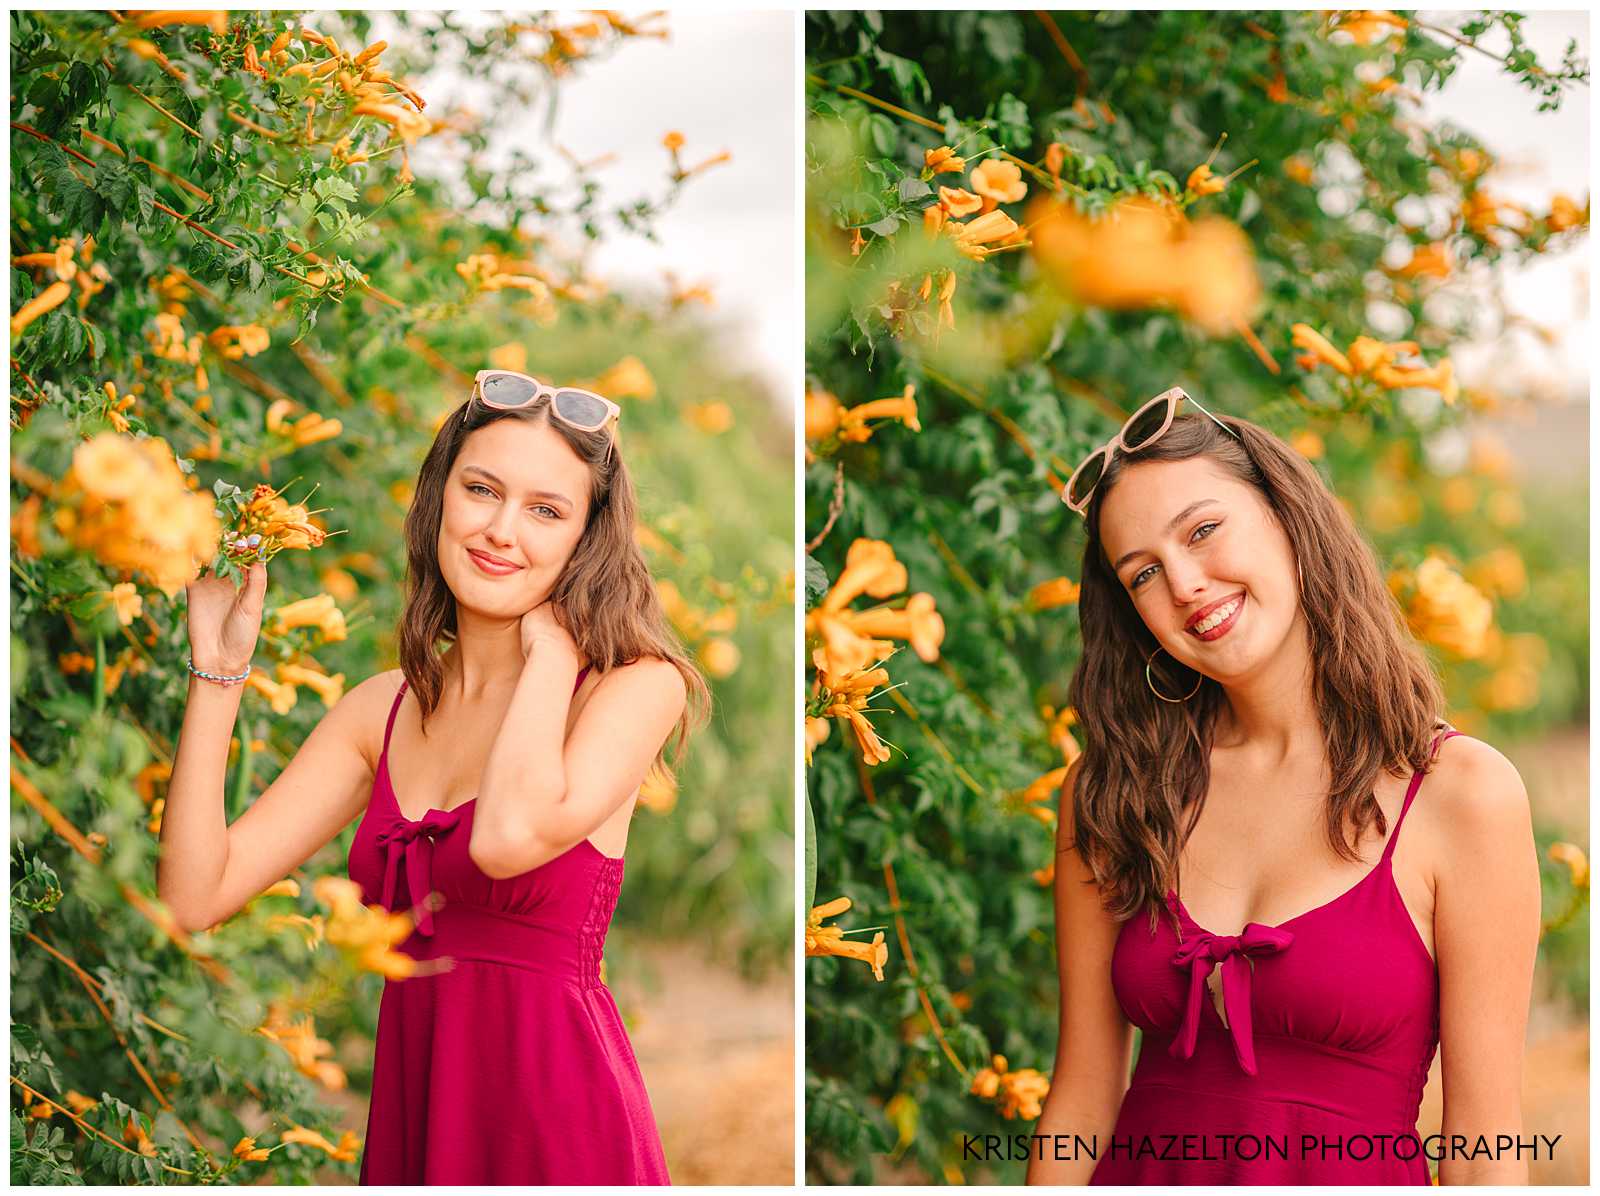 High school senior girl wearing a pink dress with sunglasses on her head, standing next to orange trumpet vines.